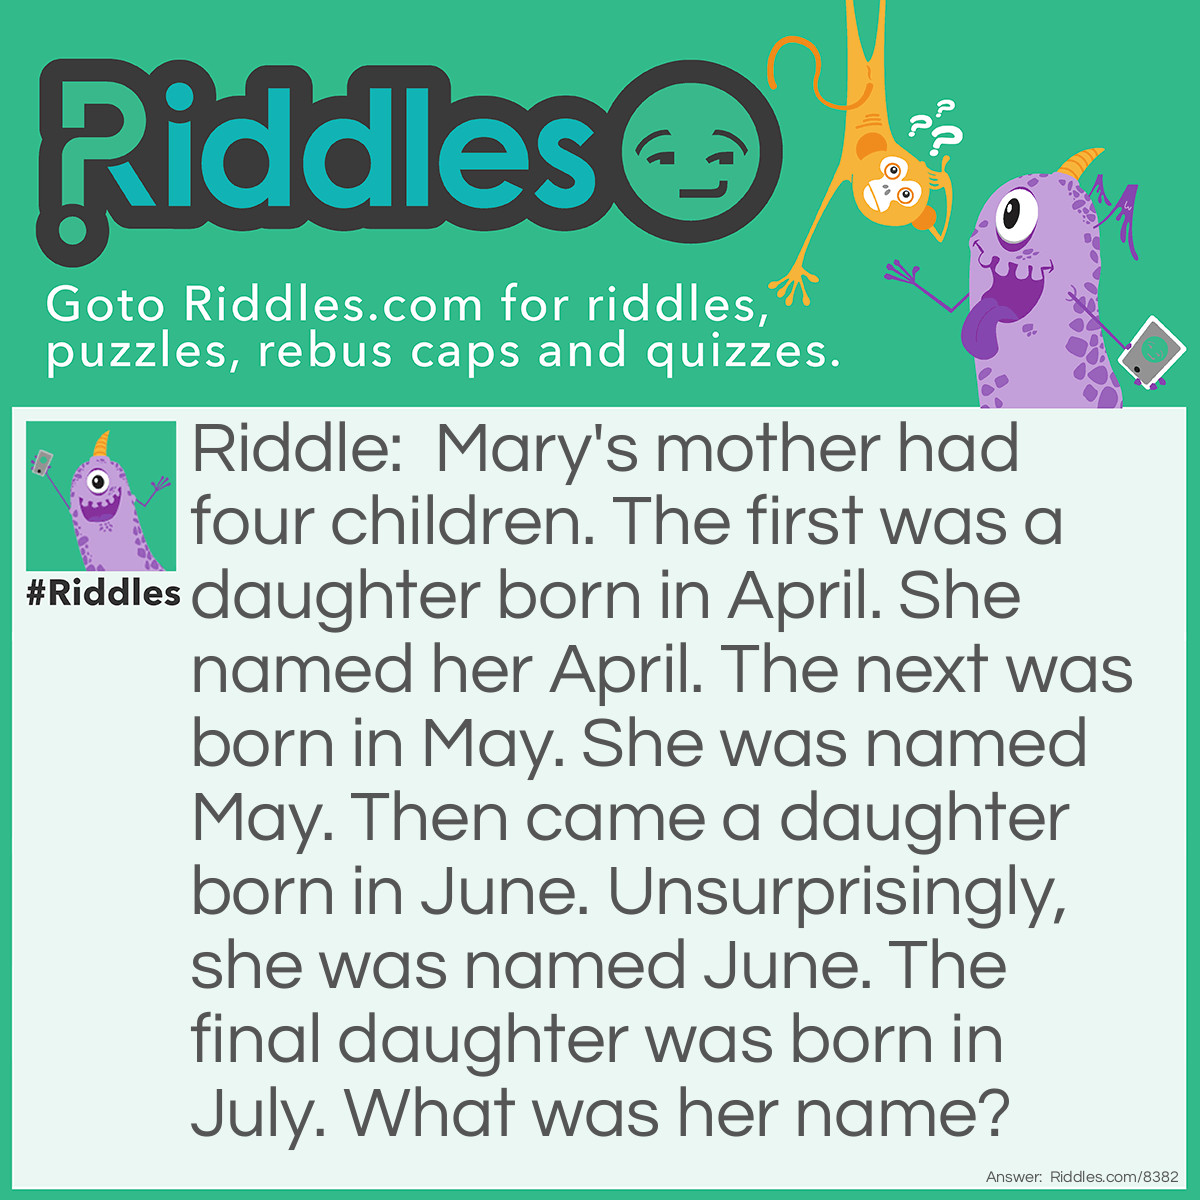 Riddle: Mary's mother had four children. The first was a daughter born in April. She named her April. The next was born in May. She was named May. Then came a daughter born in June. Unsurprisingly, she was named June. The final daughter was born in July. What was her name? Answer: Mary's mother had four children. If none of the others were named Mary, then it had to be the fourth. Thus, her name was Mary.